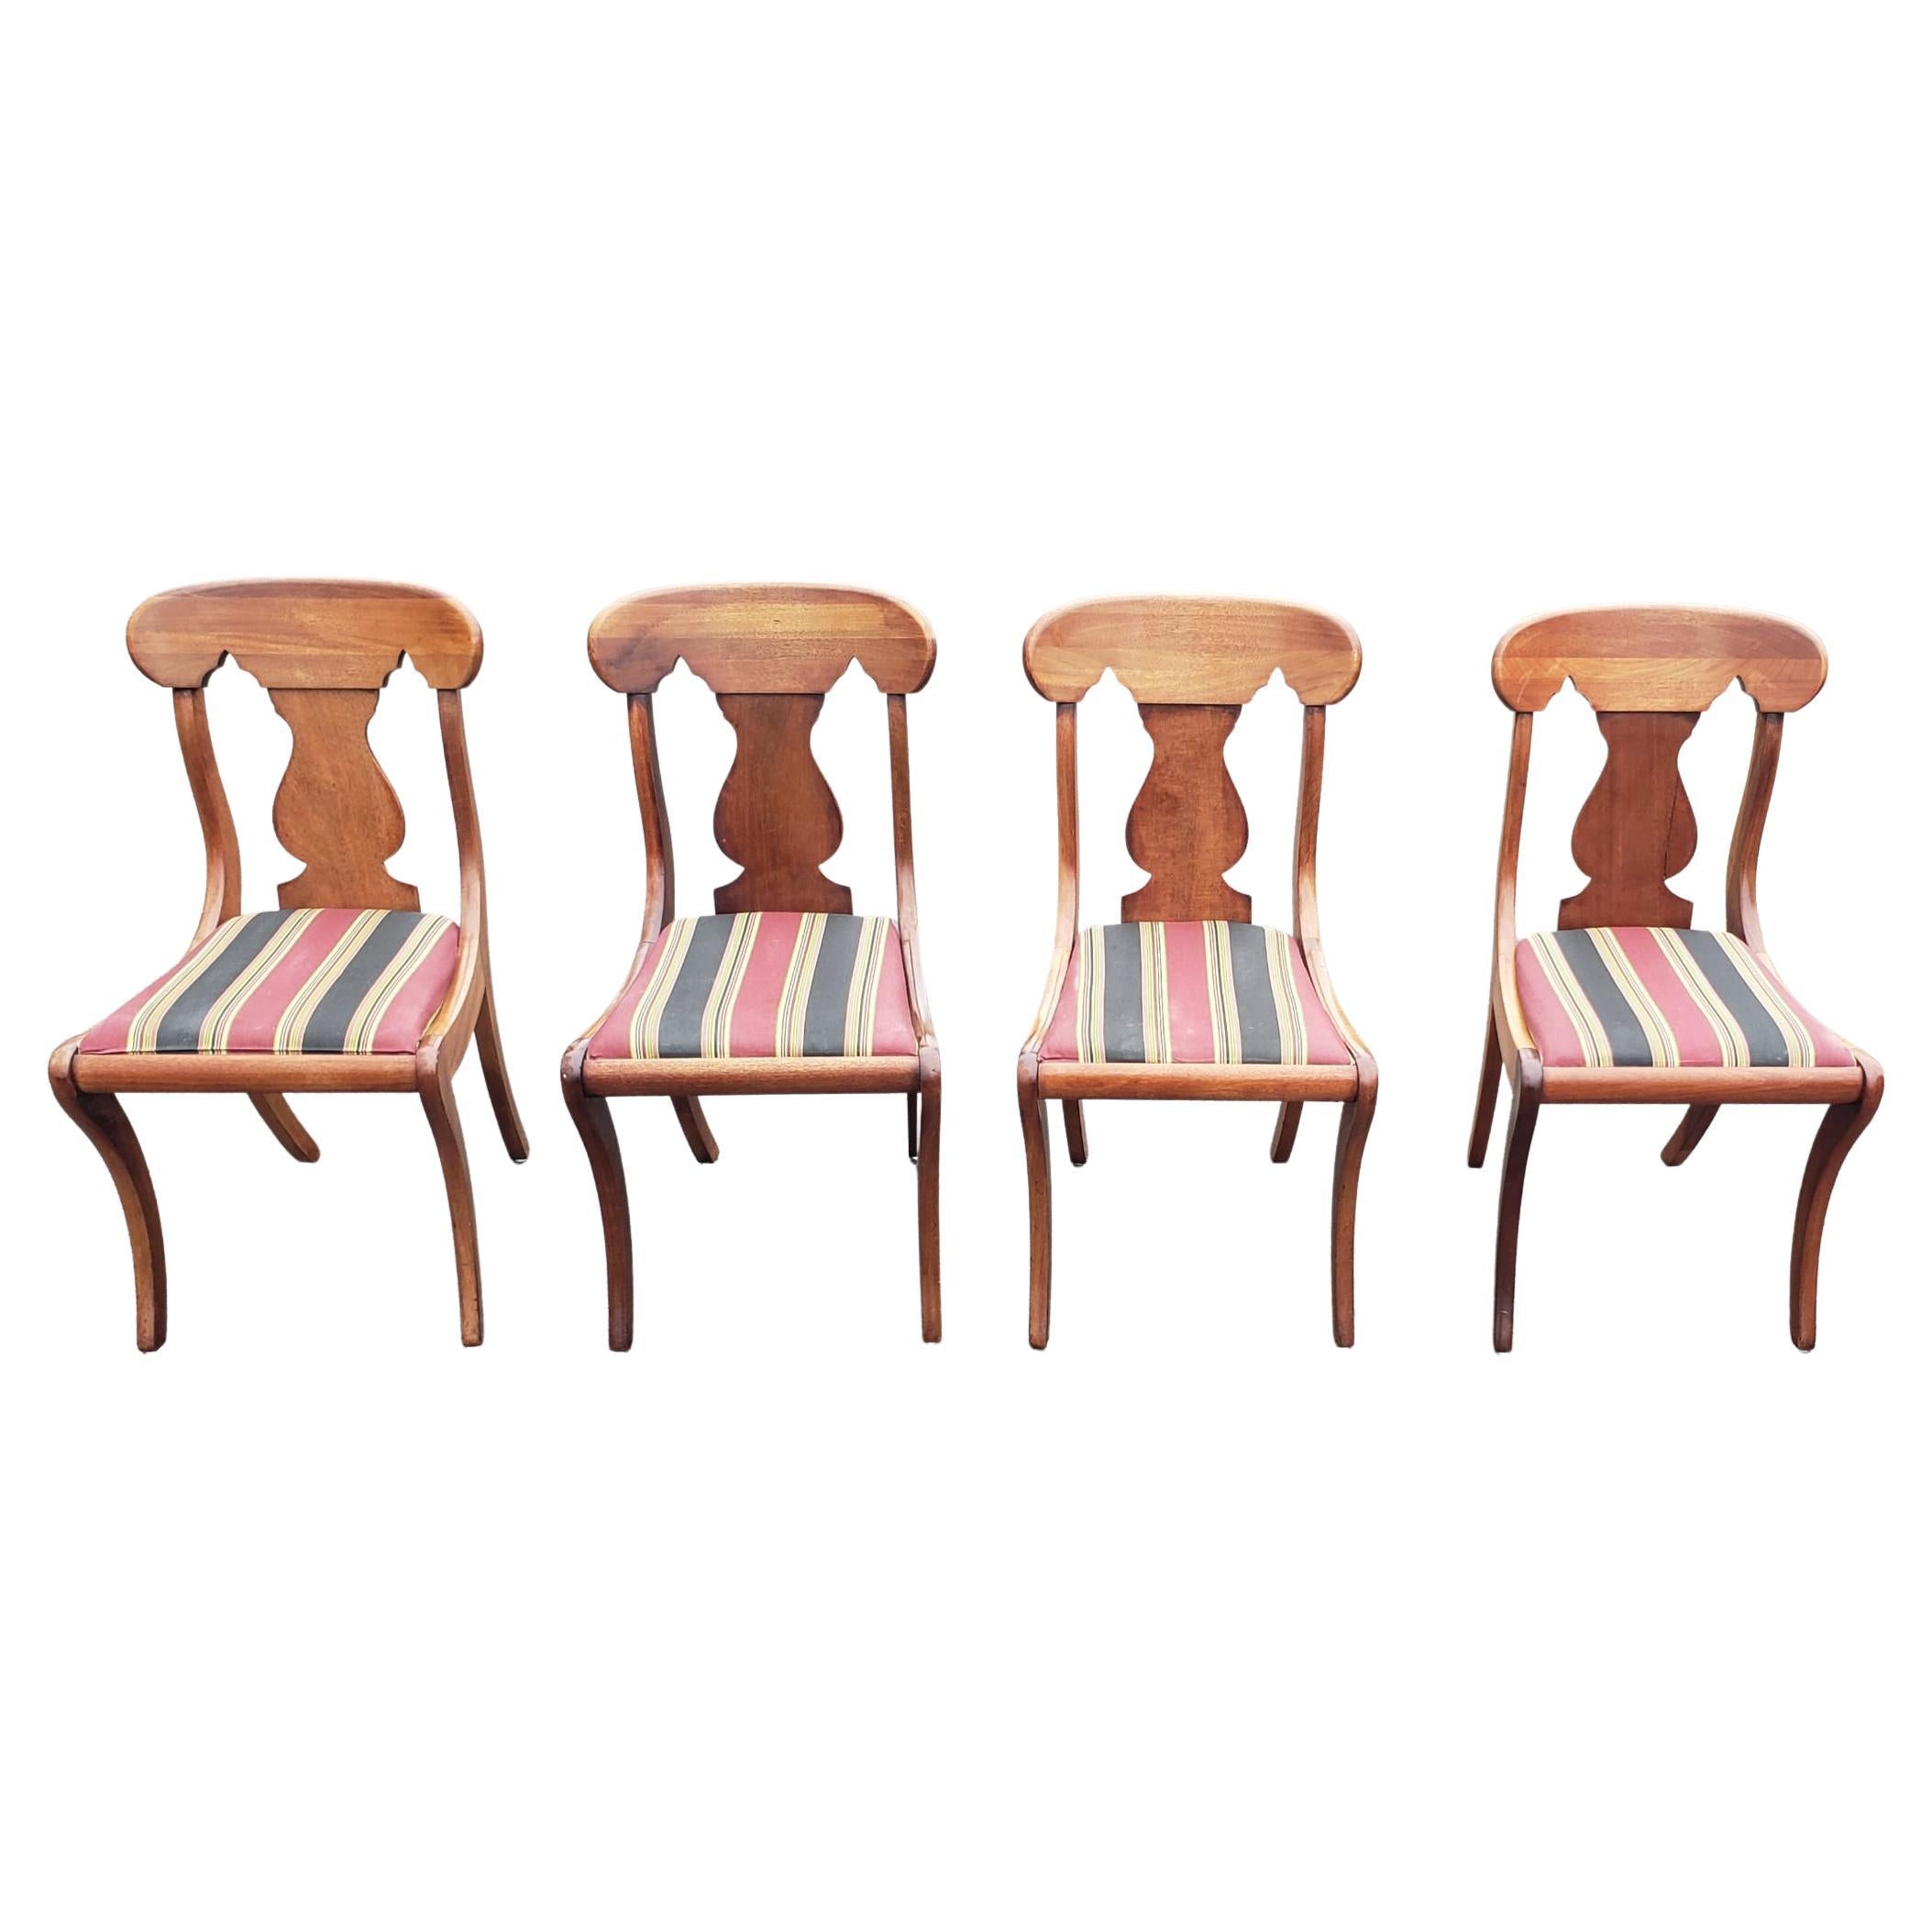 American 1930s Hickory Chair Empire Klismos Mahogany and Upholstered Seat Side Chairs For Sale